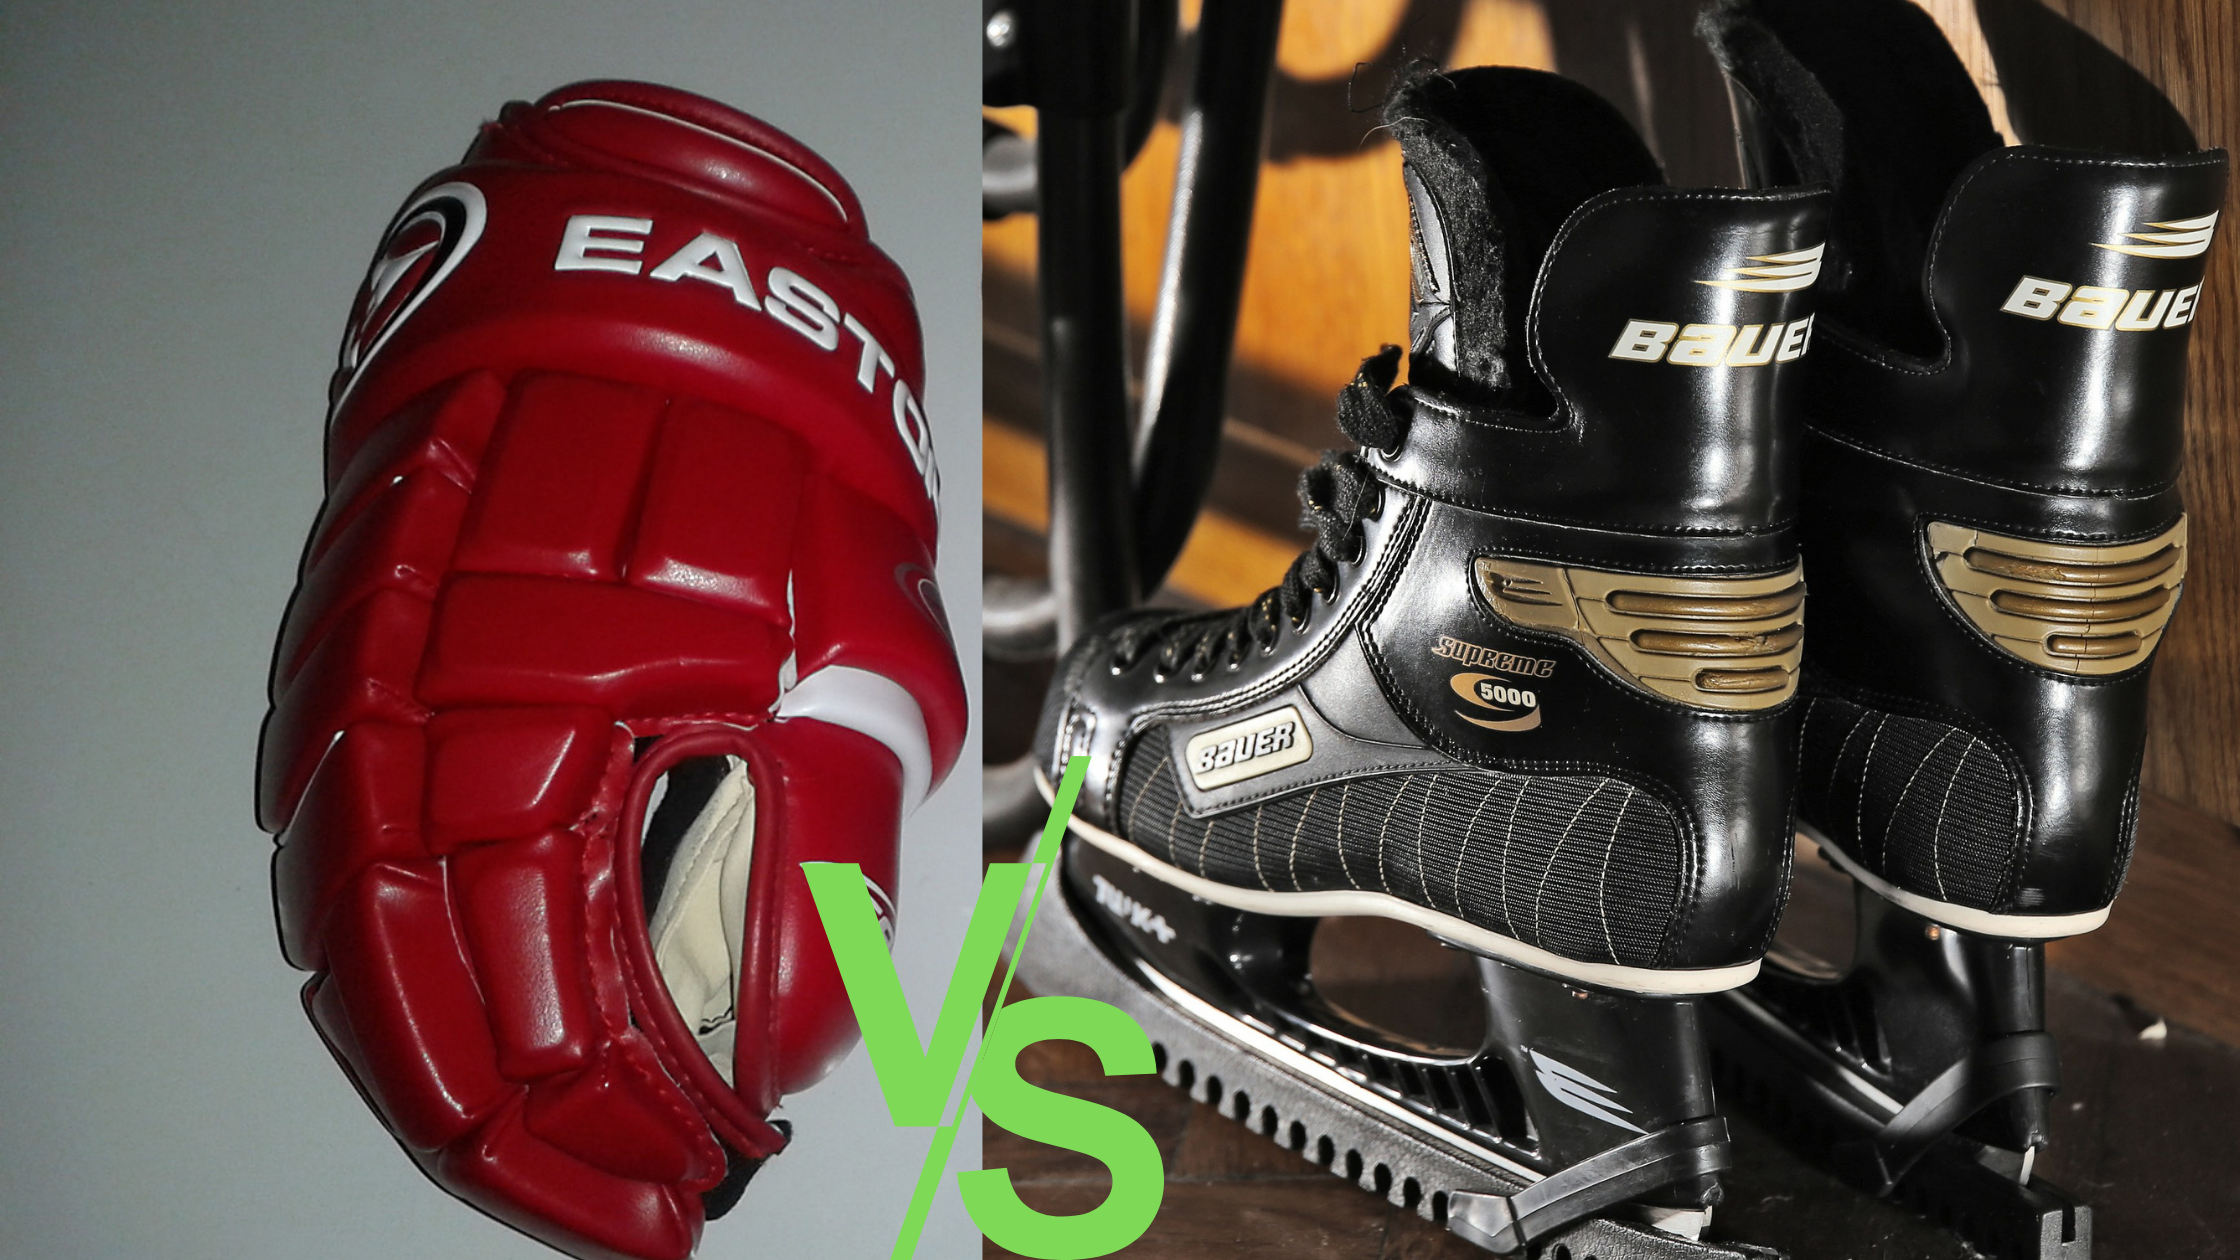 Bauer Vs Easton: Which Hockey Brand Makes the Best Products?